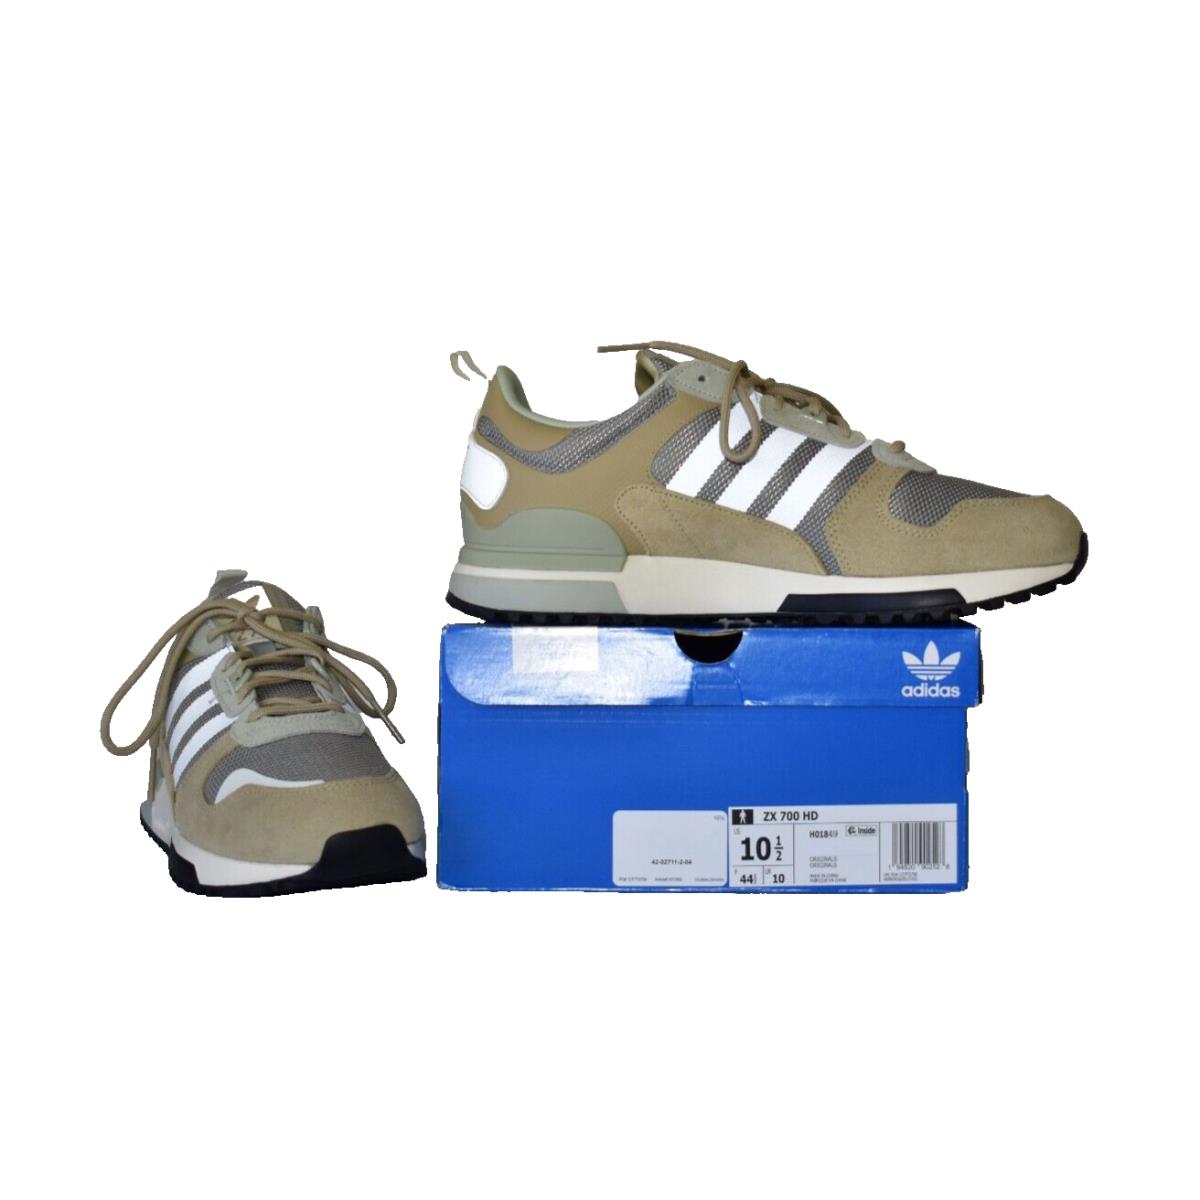 B8 Adidas ZX 700 HD Beige Tone-off White-feather Grey Shoes H01849 Size 10.5